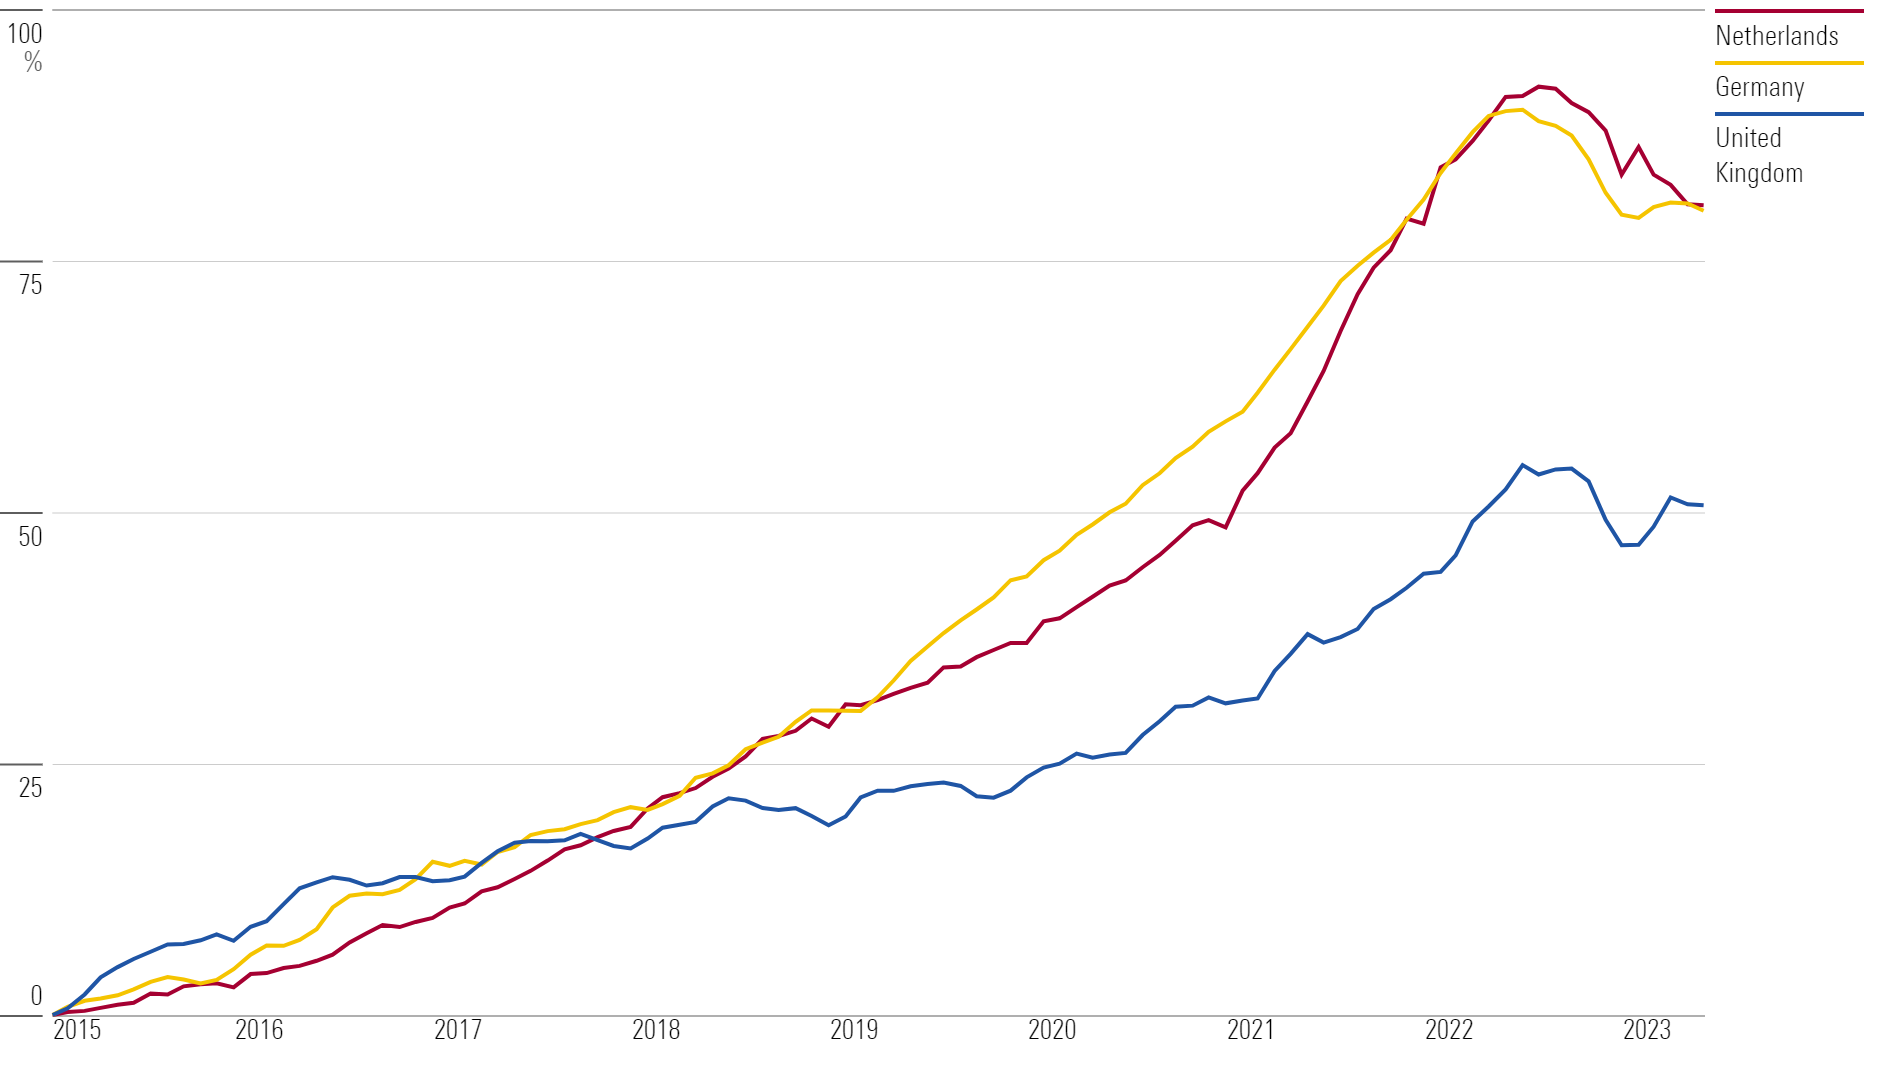 A line chart comparing the housing prices of the Netherlands, Germany, and the United Kingdom from January 2015 to May 2023.